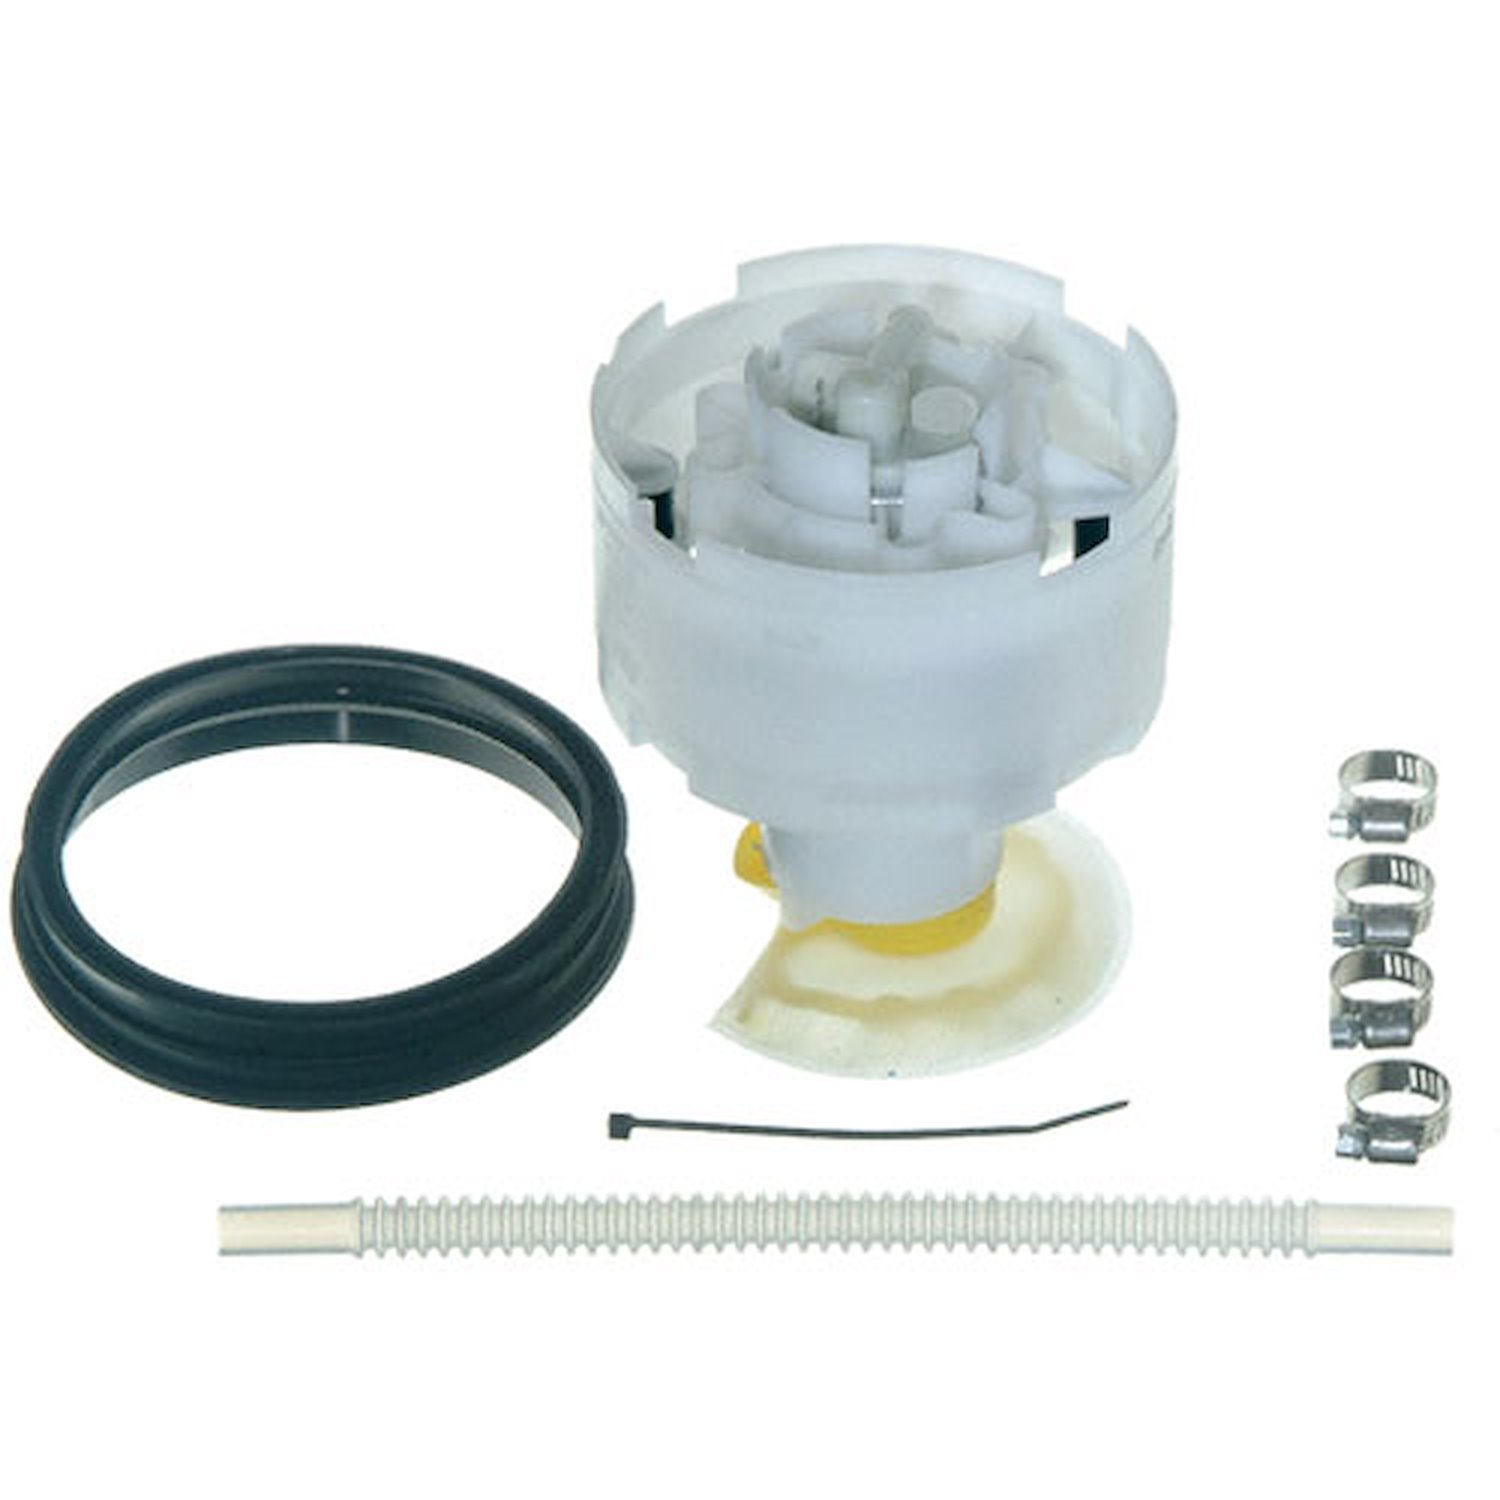 OE Replacement Electric Fuel Pump Module Assembly for 1998-2004 Audi A6 3.0L V6